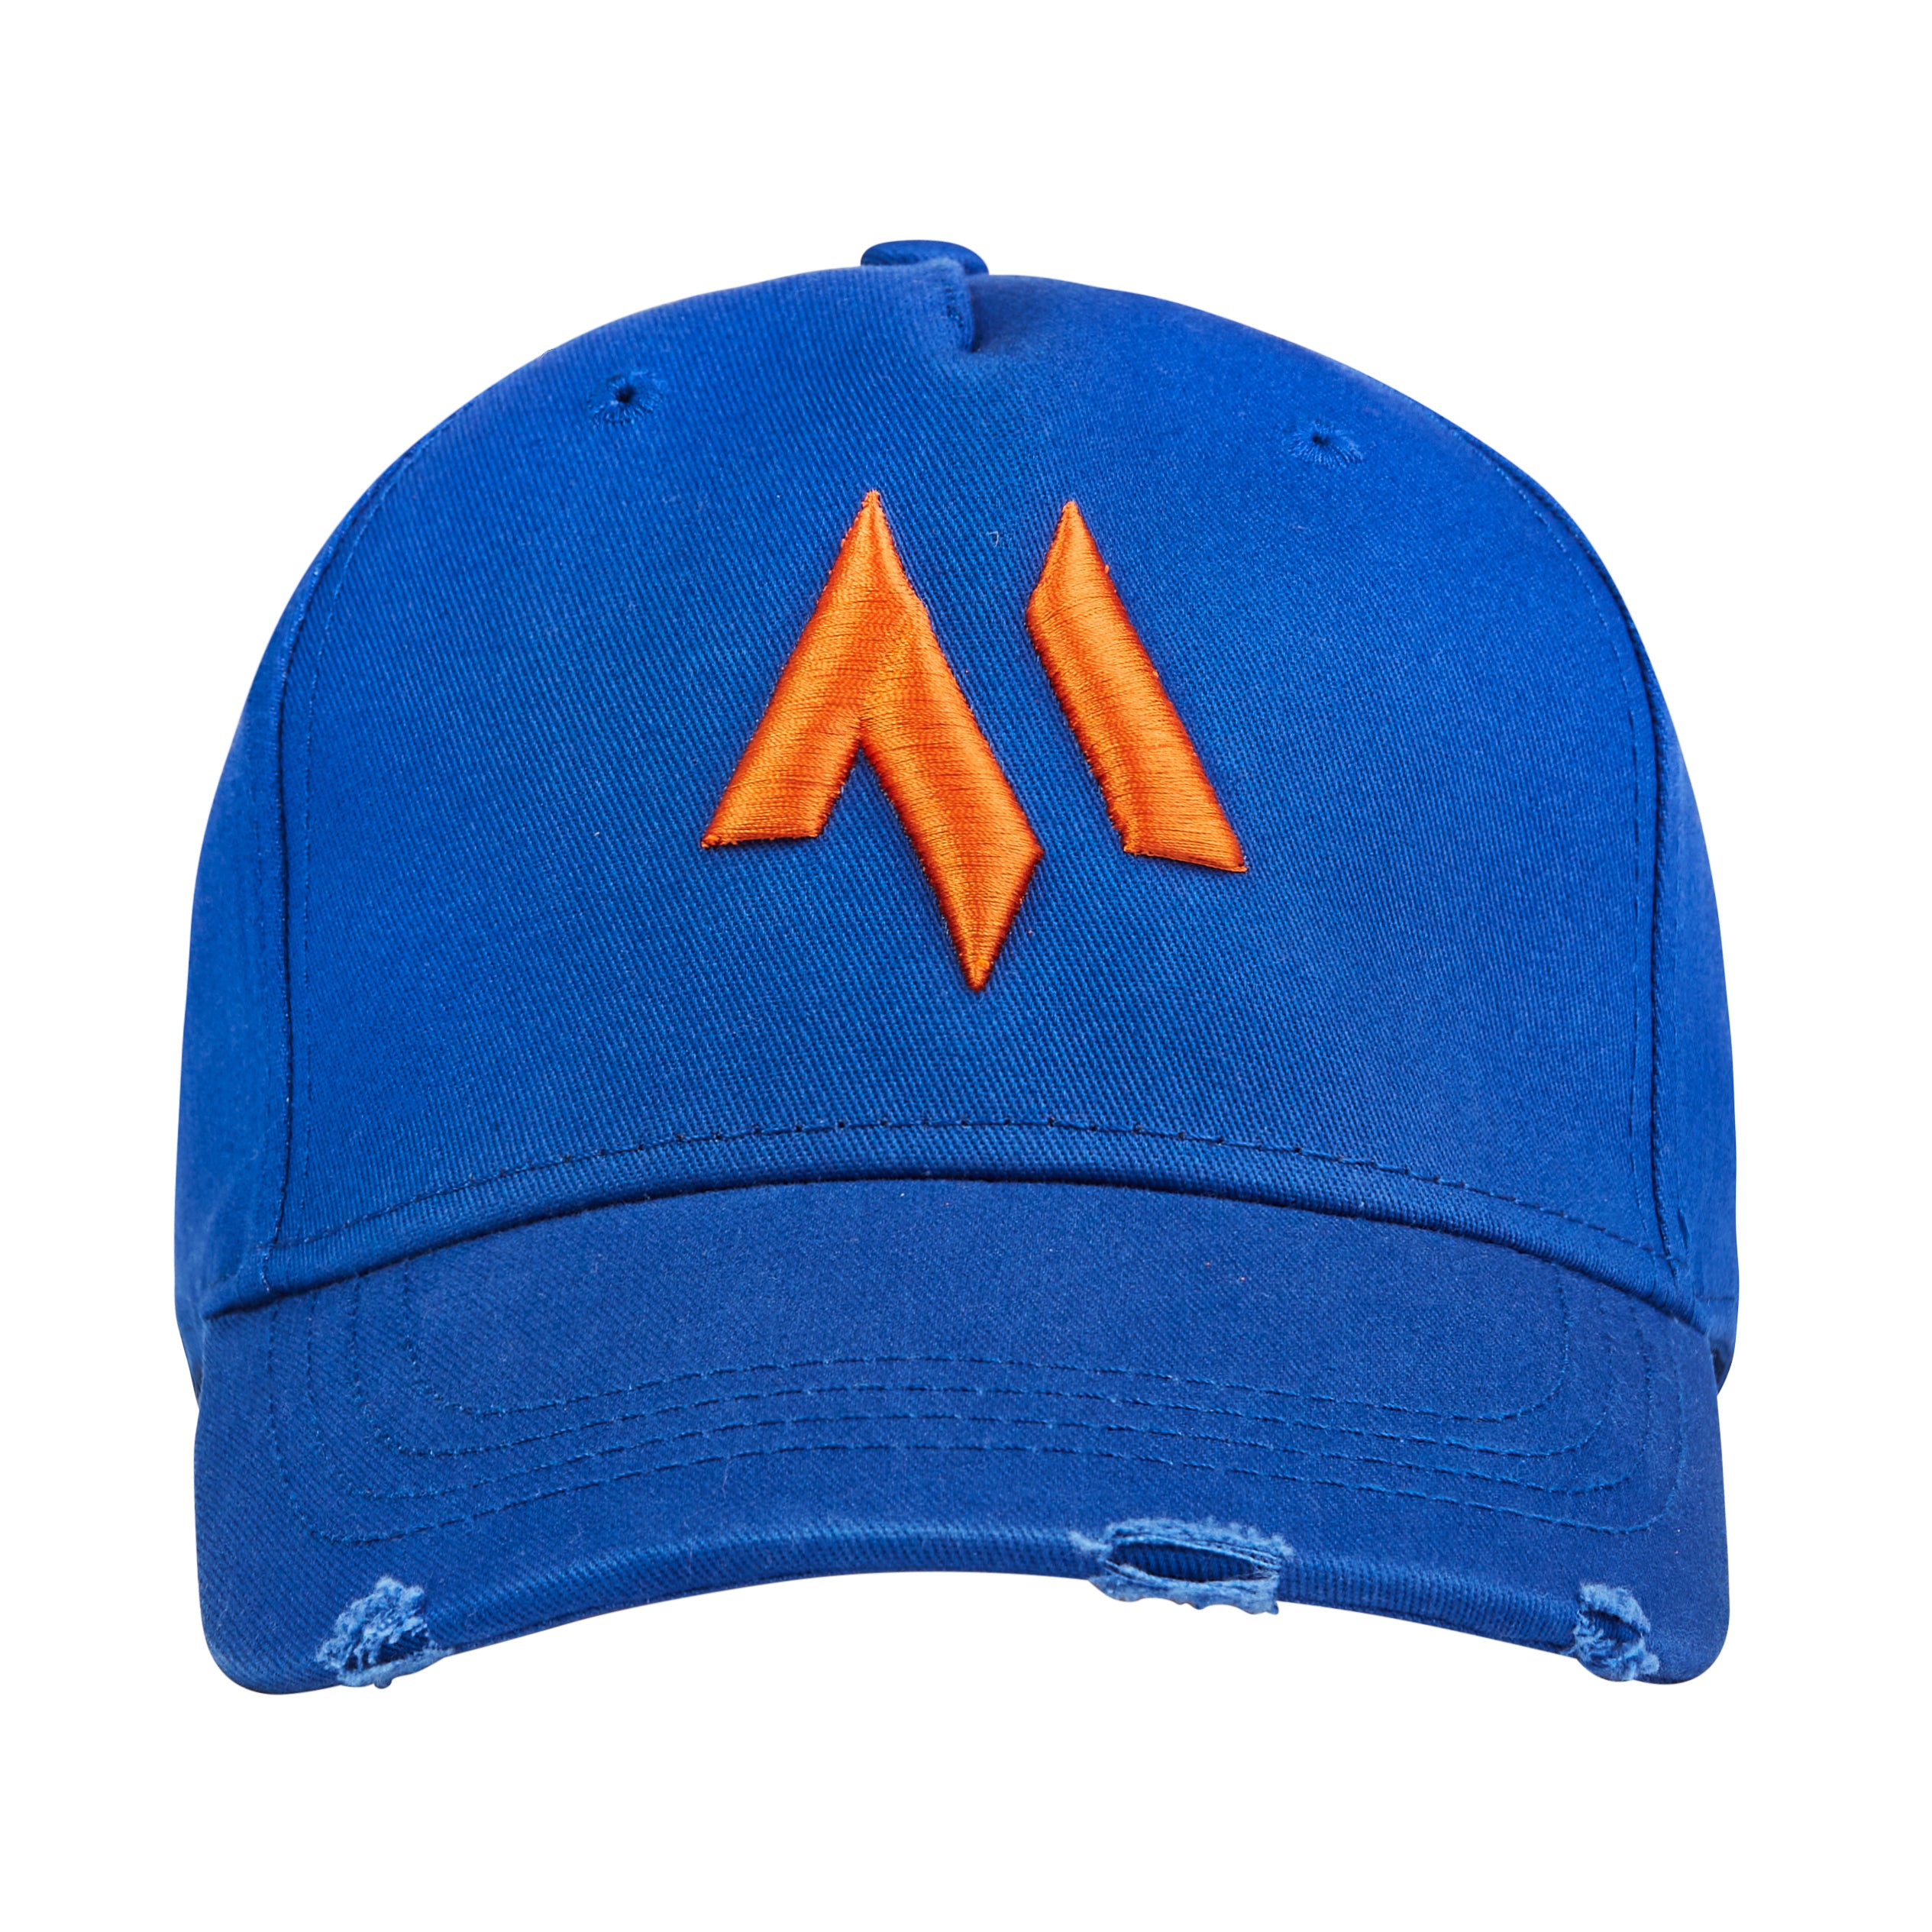 This is the new standard 3d distressed 5 panel in electric blue with an orange emblem. It is a large product image of the hat on a white background